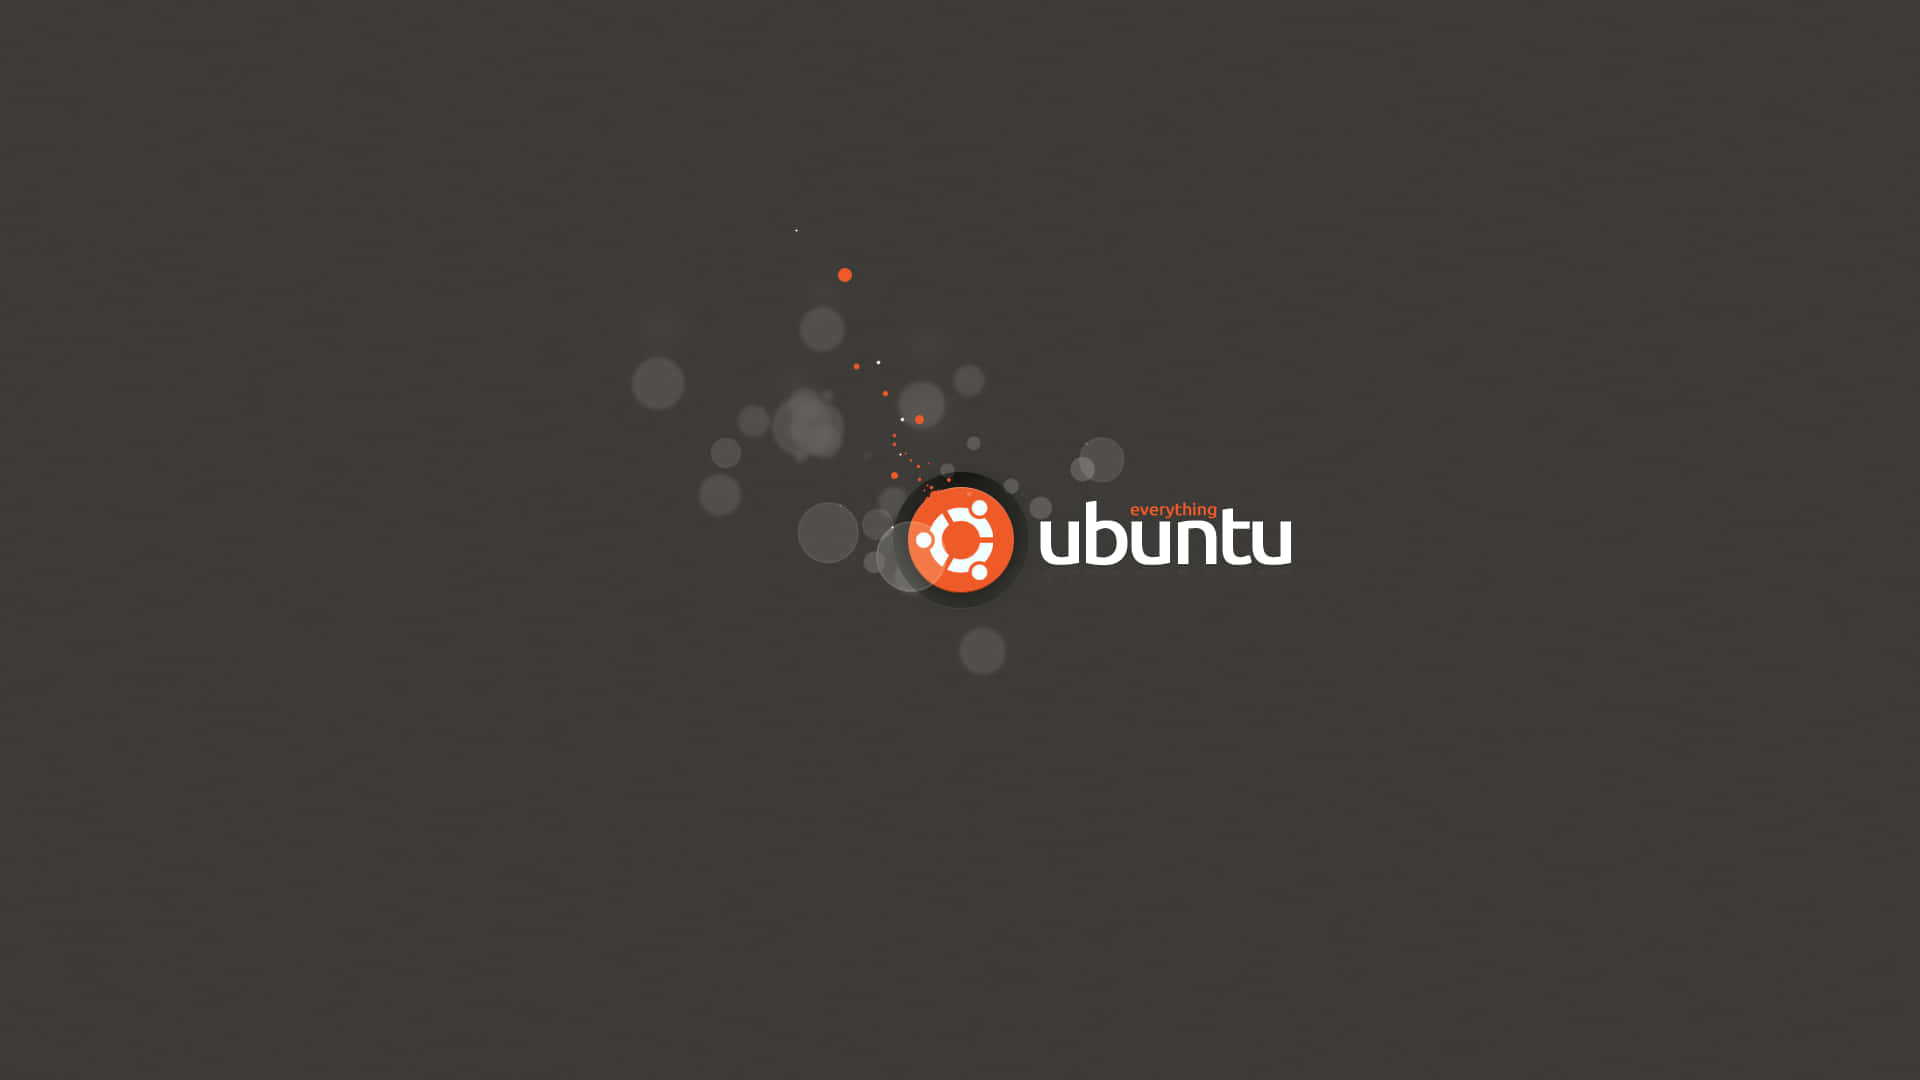 A Welcome to the World of Ubuntu